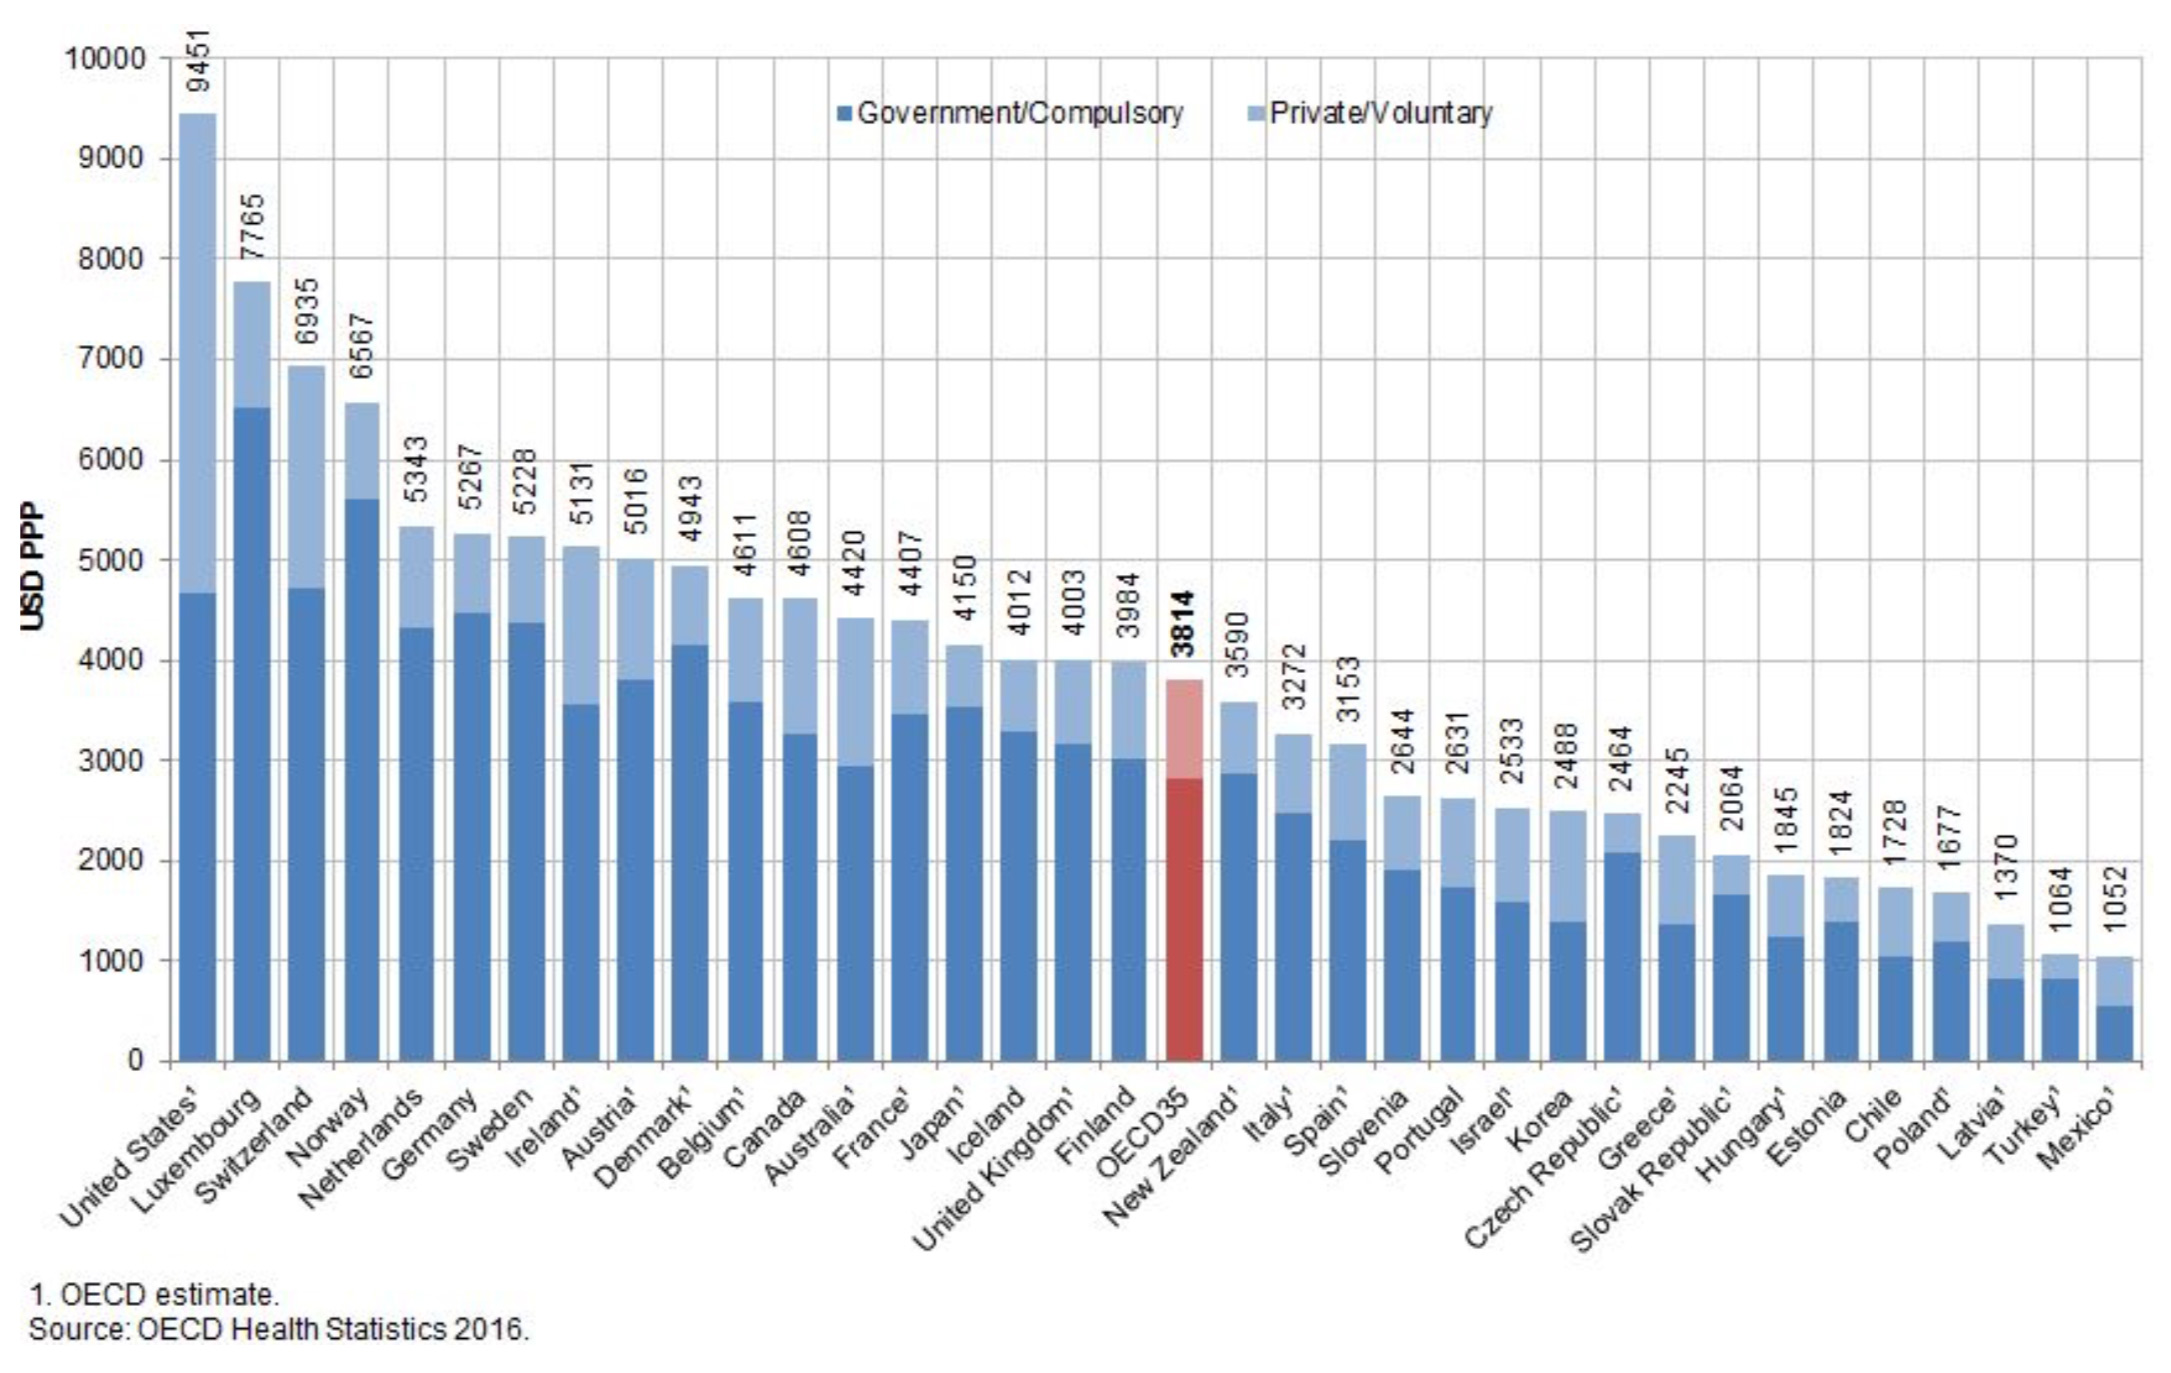 Healthcare spending compared to other OECD nations